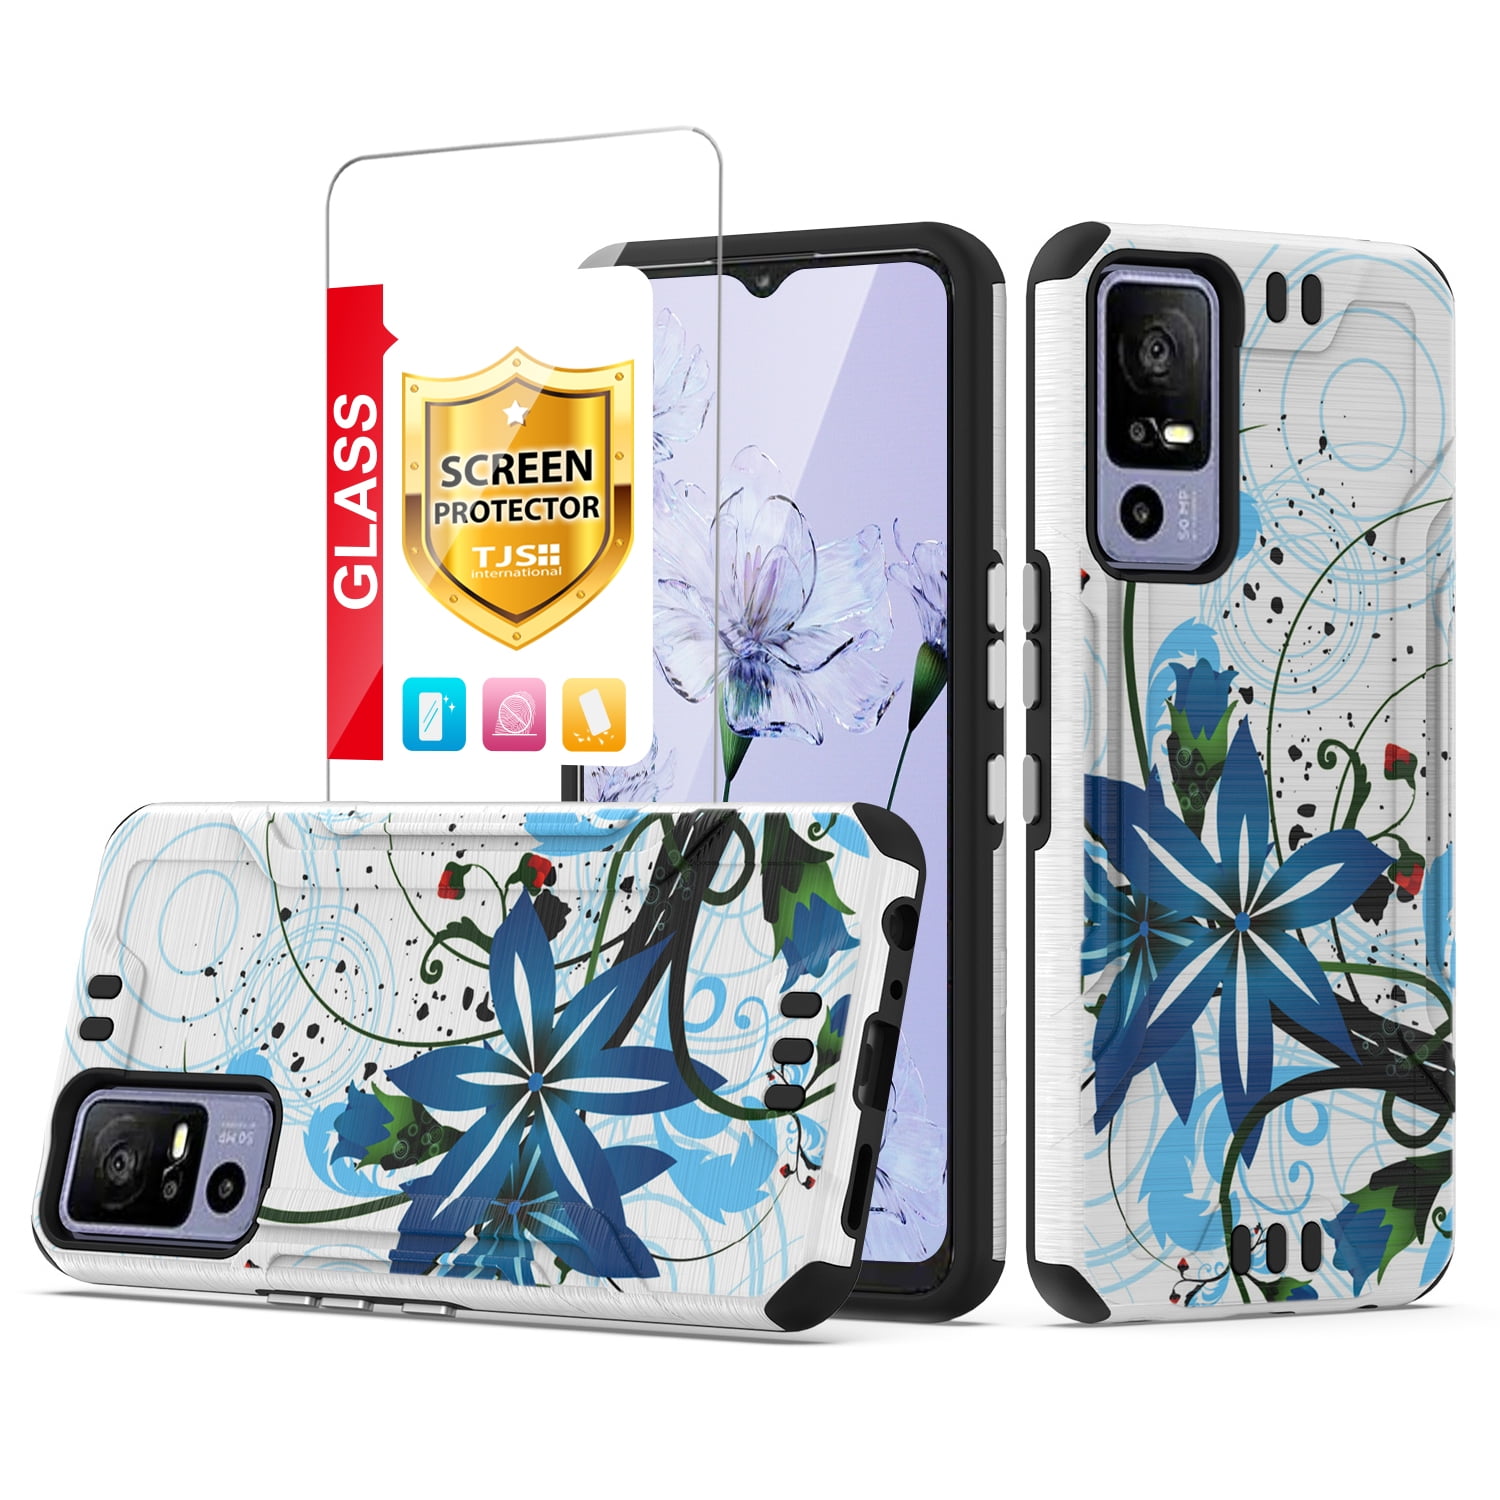  jioeuinly TCL 40 NXTPAPER 5G Case Compatible with TCL 40  NXTPAPER 5G Phone Case Cover [with Tempered Glass Screen Protector][Ring  Support][Golden Reflect Light] DJH-AX : Cell Phones & Accessories